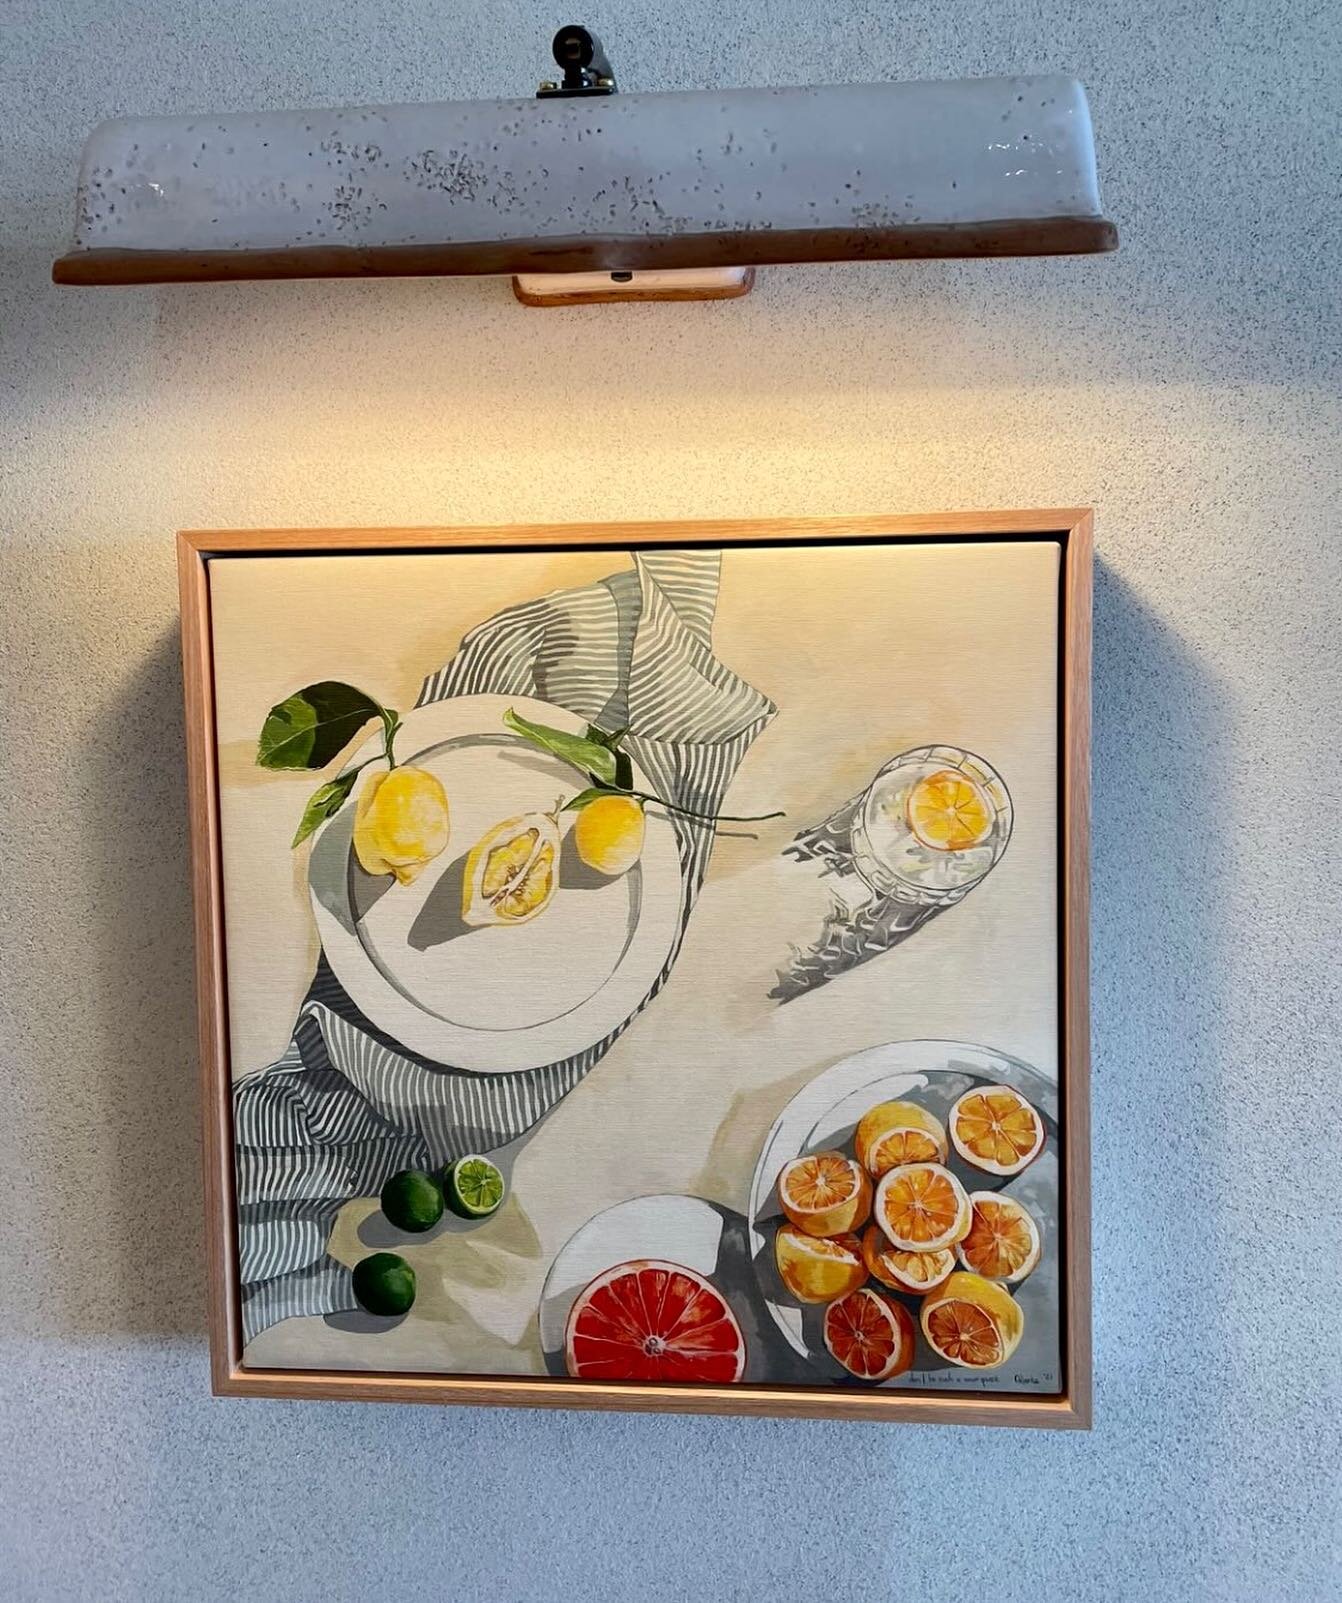 A friend of mine sent through this photo today&hellip; spotted at the @woollybay_hotel hotel my canvas print &ldquo;don&rsquo;t be such a sour puss&rdquo;&hellip; thrilled to have this artwork featured in the now renovated hotel&hellip;

#sydneyinter